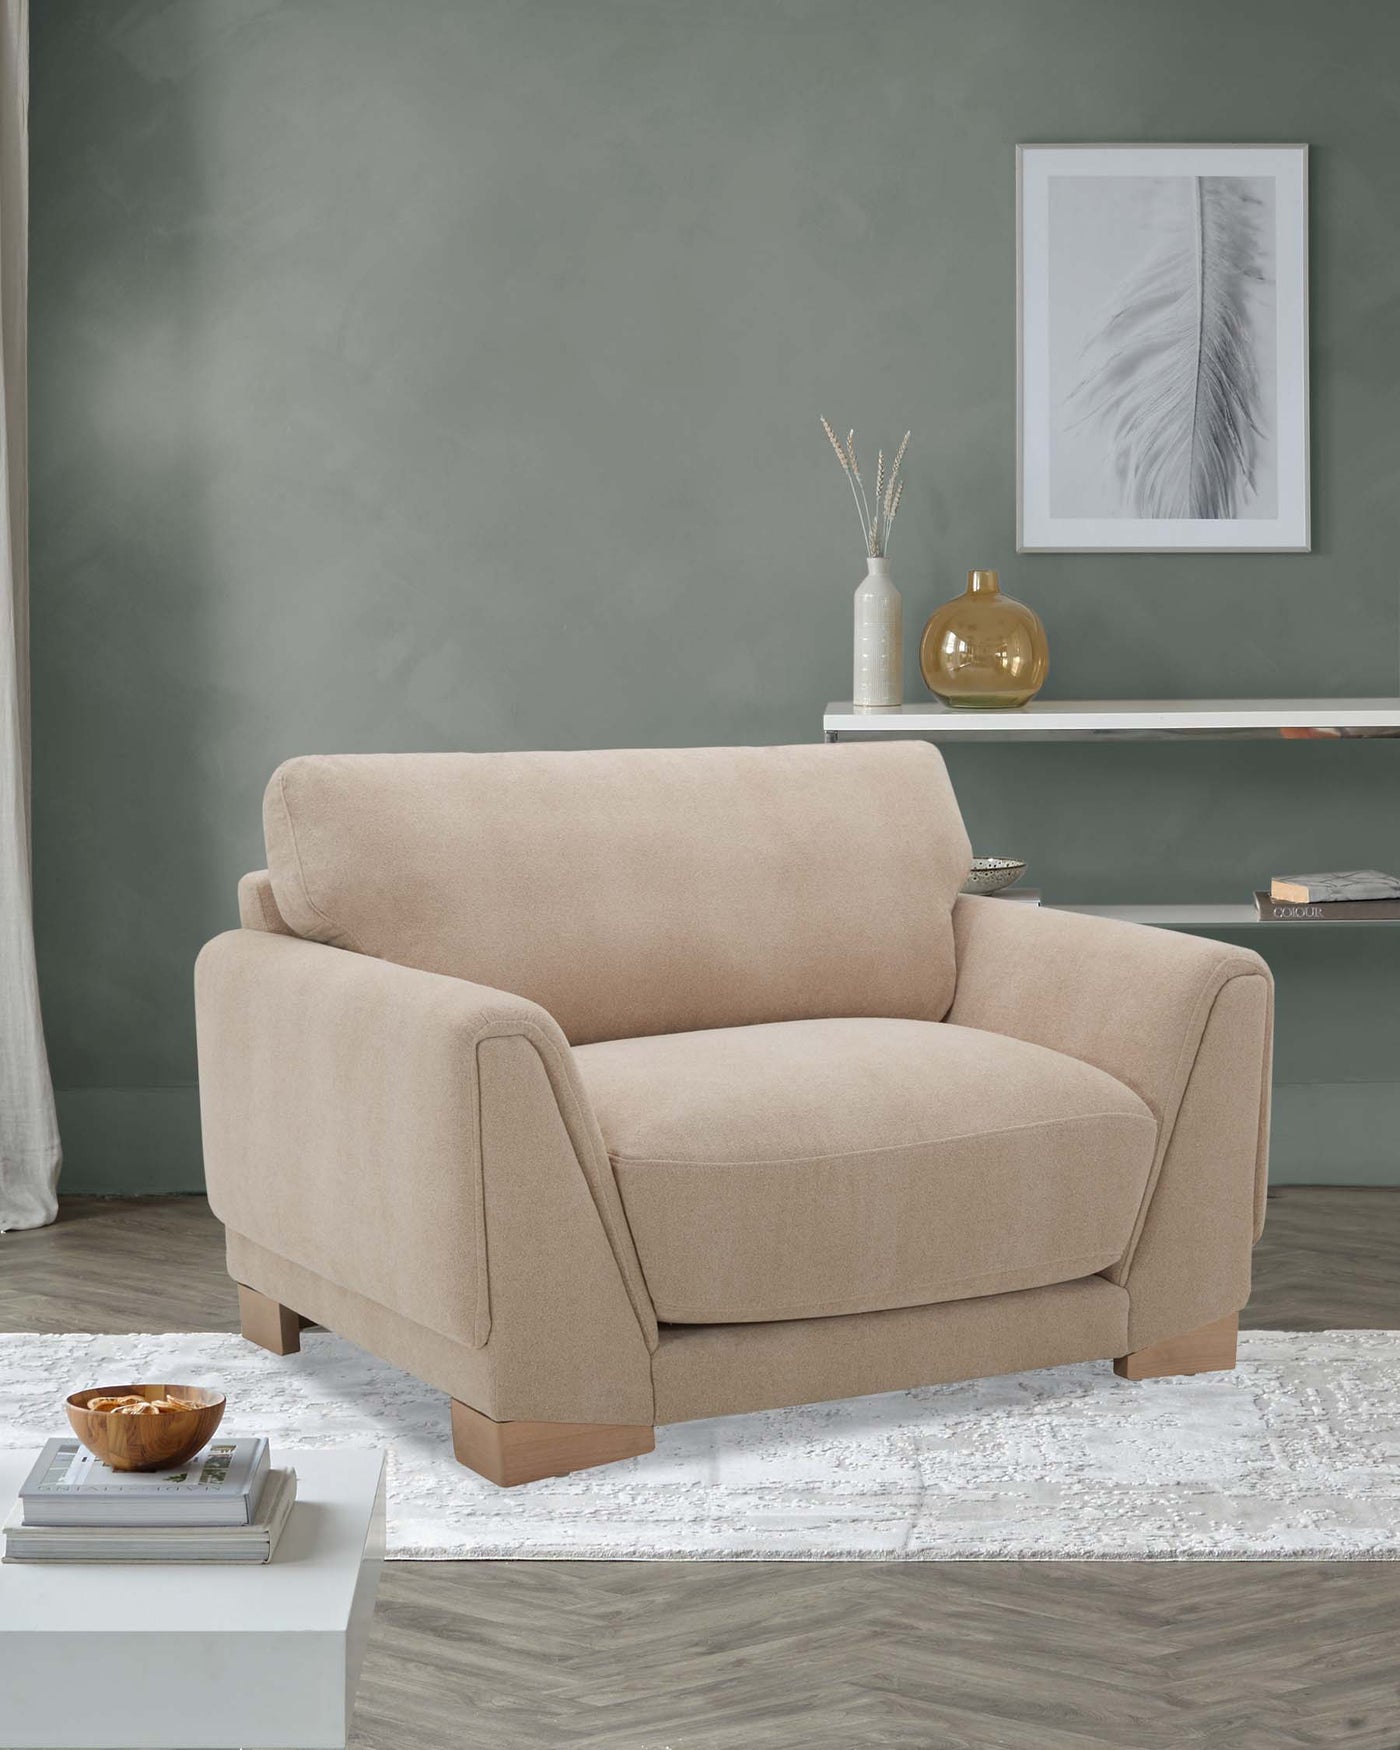 Saige natural boucle armchair with natural wood legs